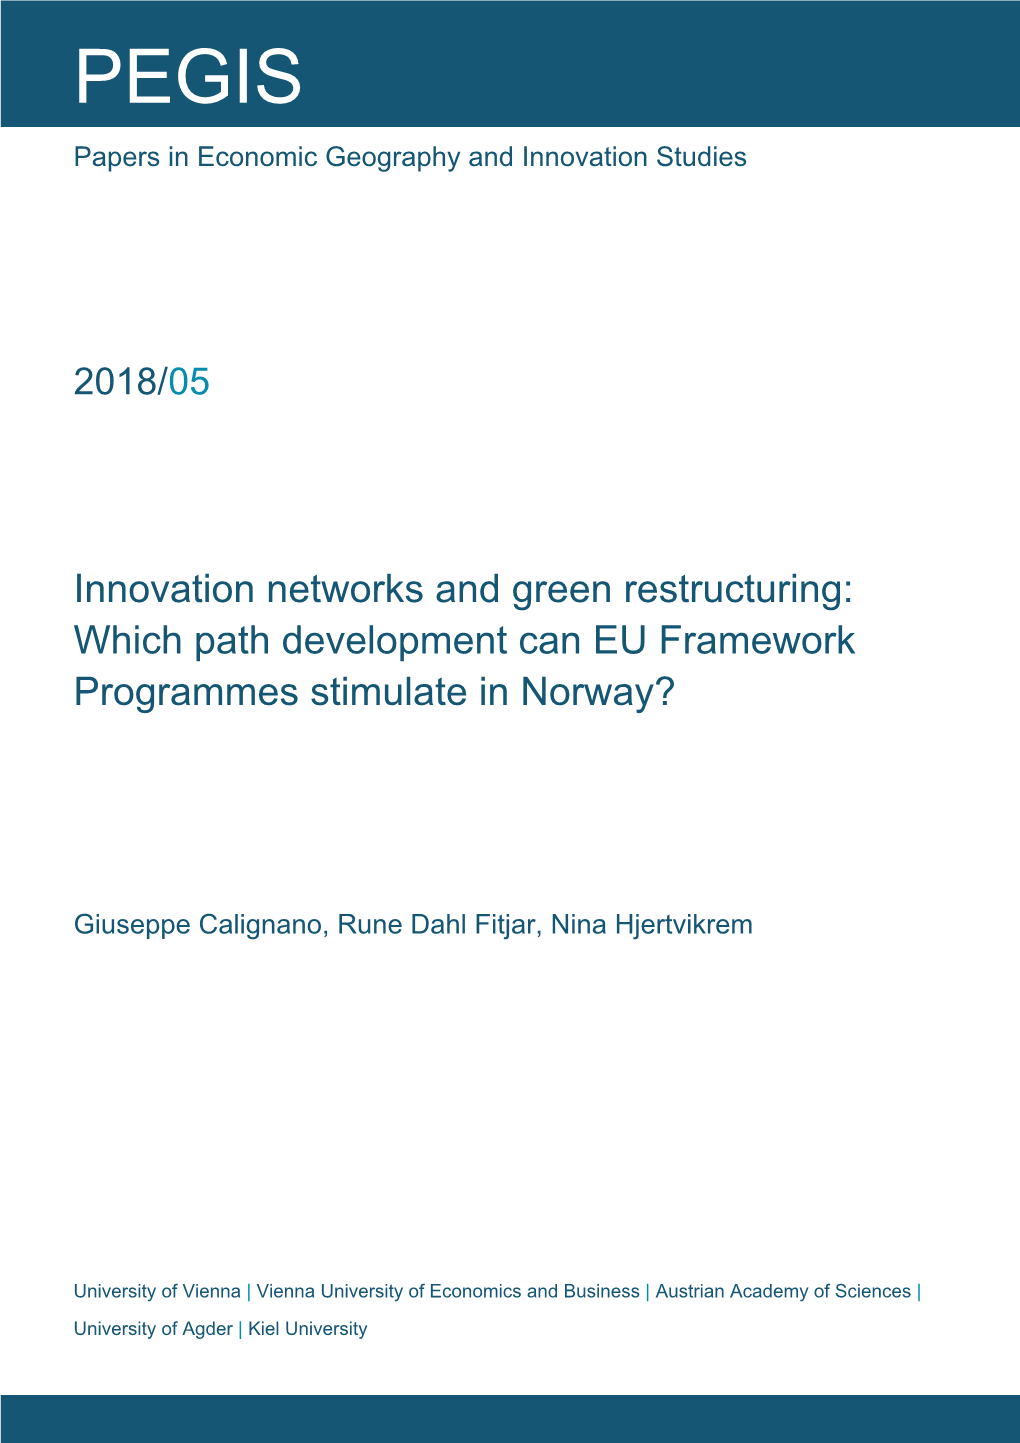 Innovation Networks and Green Restructuring: Which Path Development Can EU Framework Programmes Stimulate in Norway?